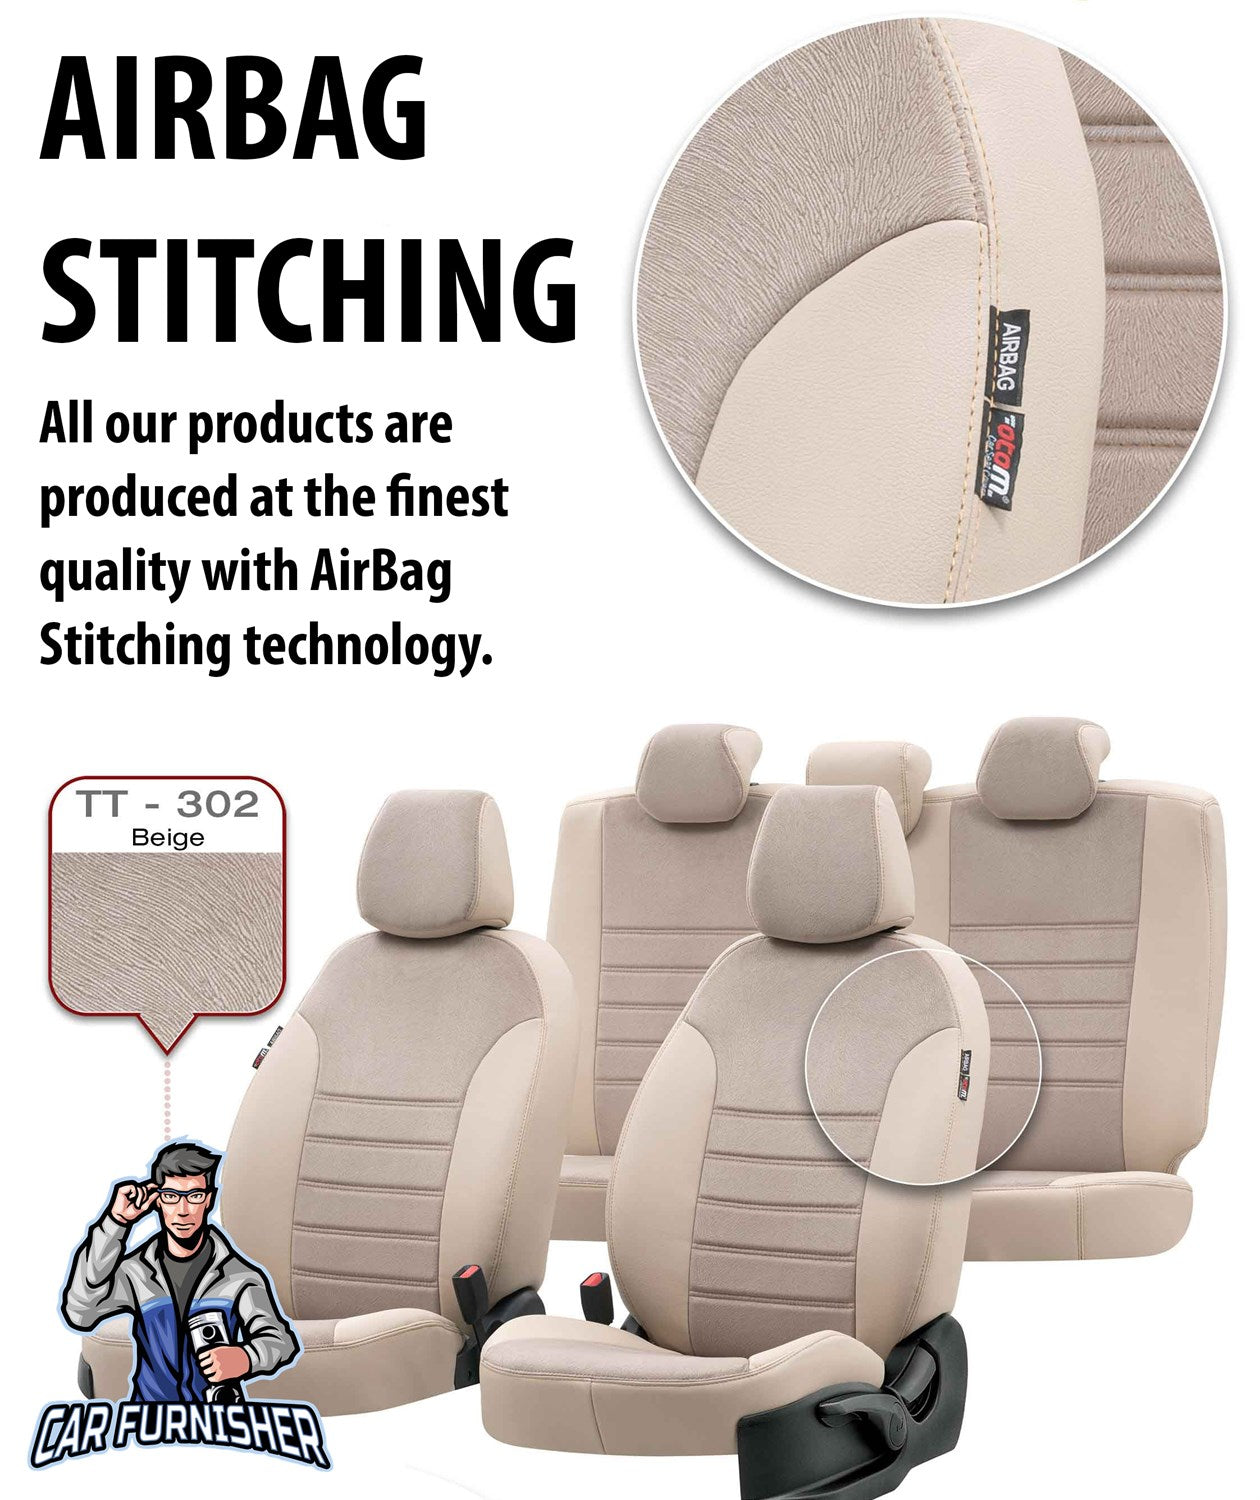 Ford Ranger Seat Covers London Foal Feather Design Beige Leather & Foal Feather